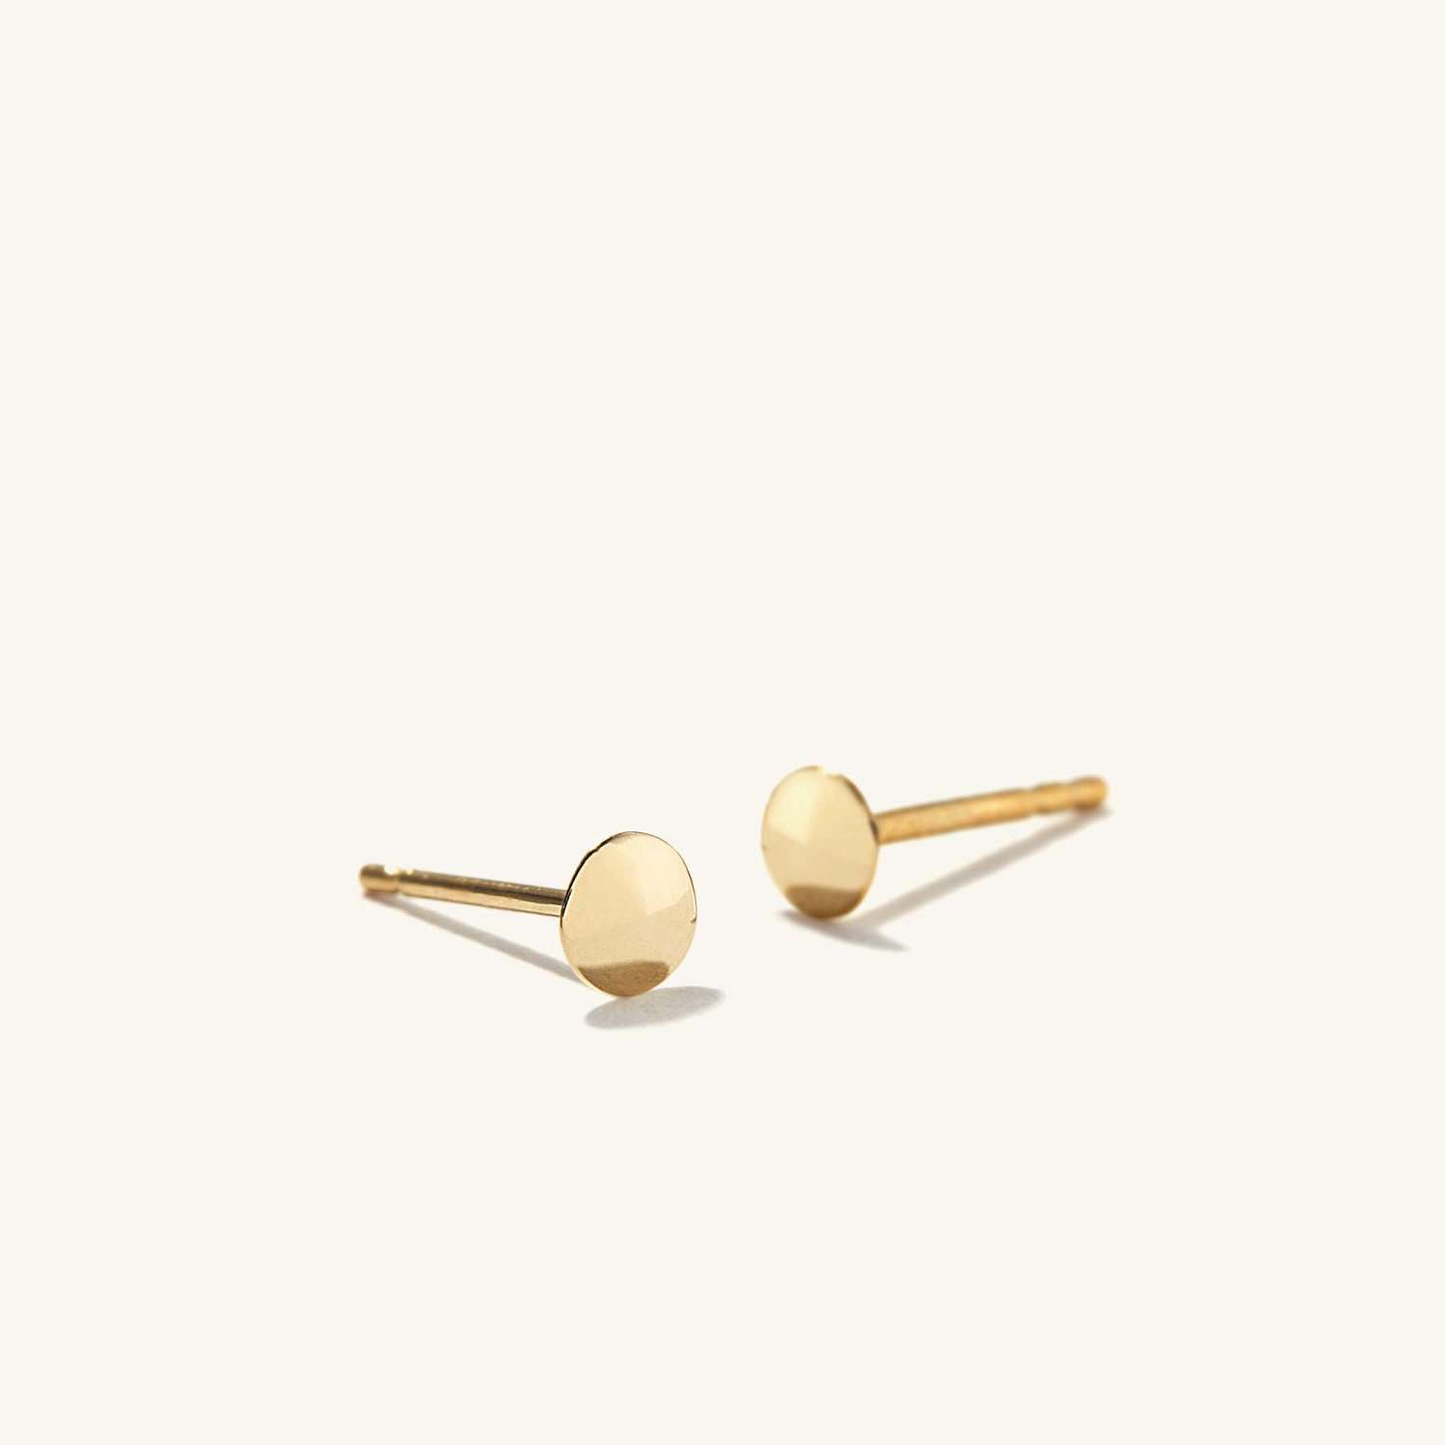 Unique Daily Wear Thumbtack 14K Solid Gold Stud Earring